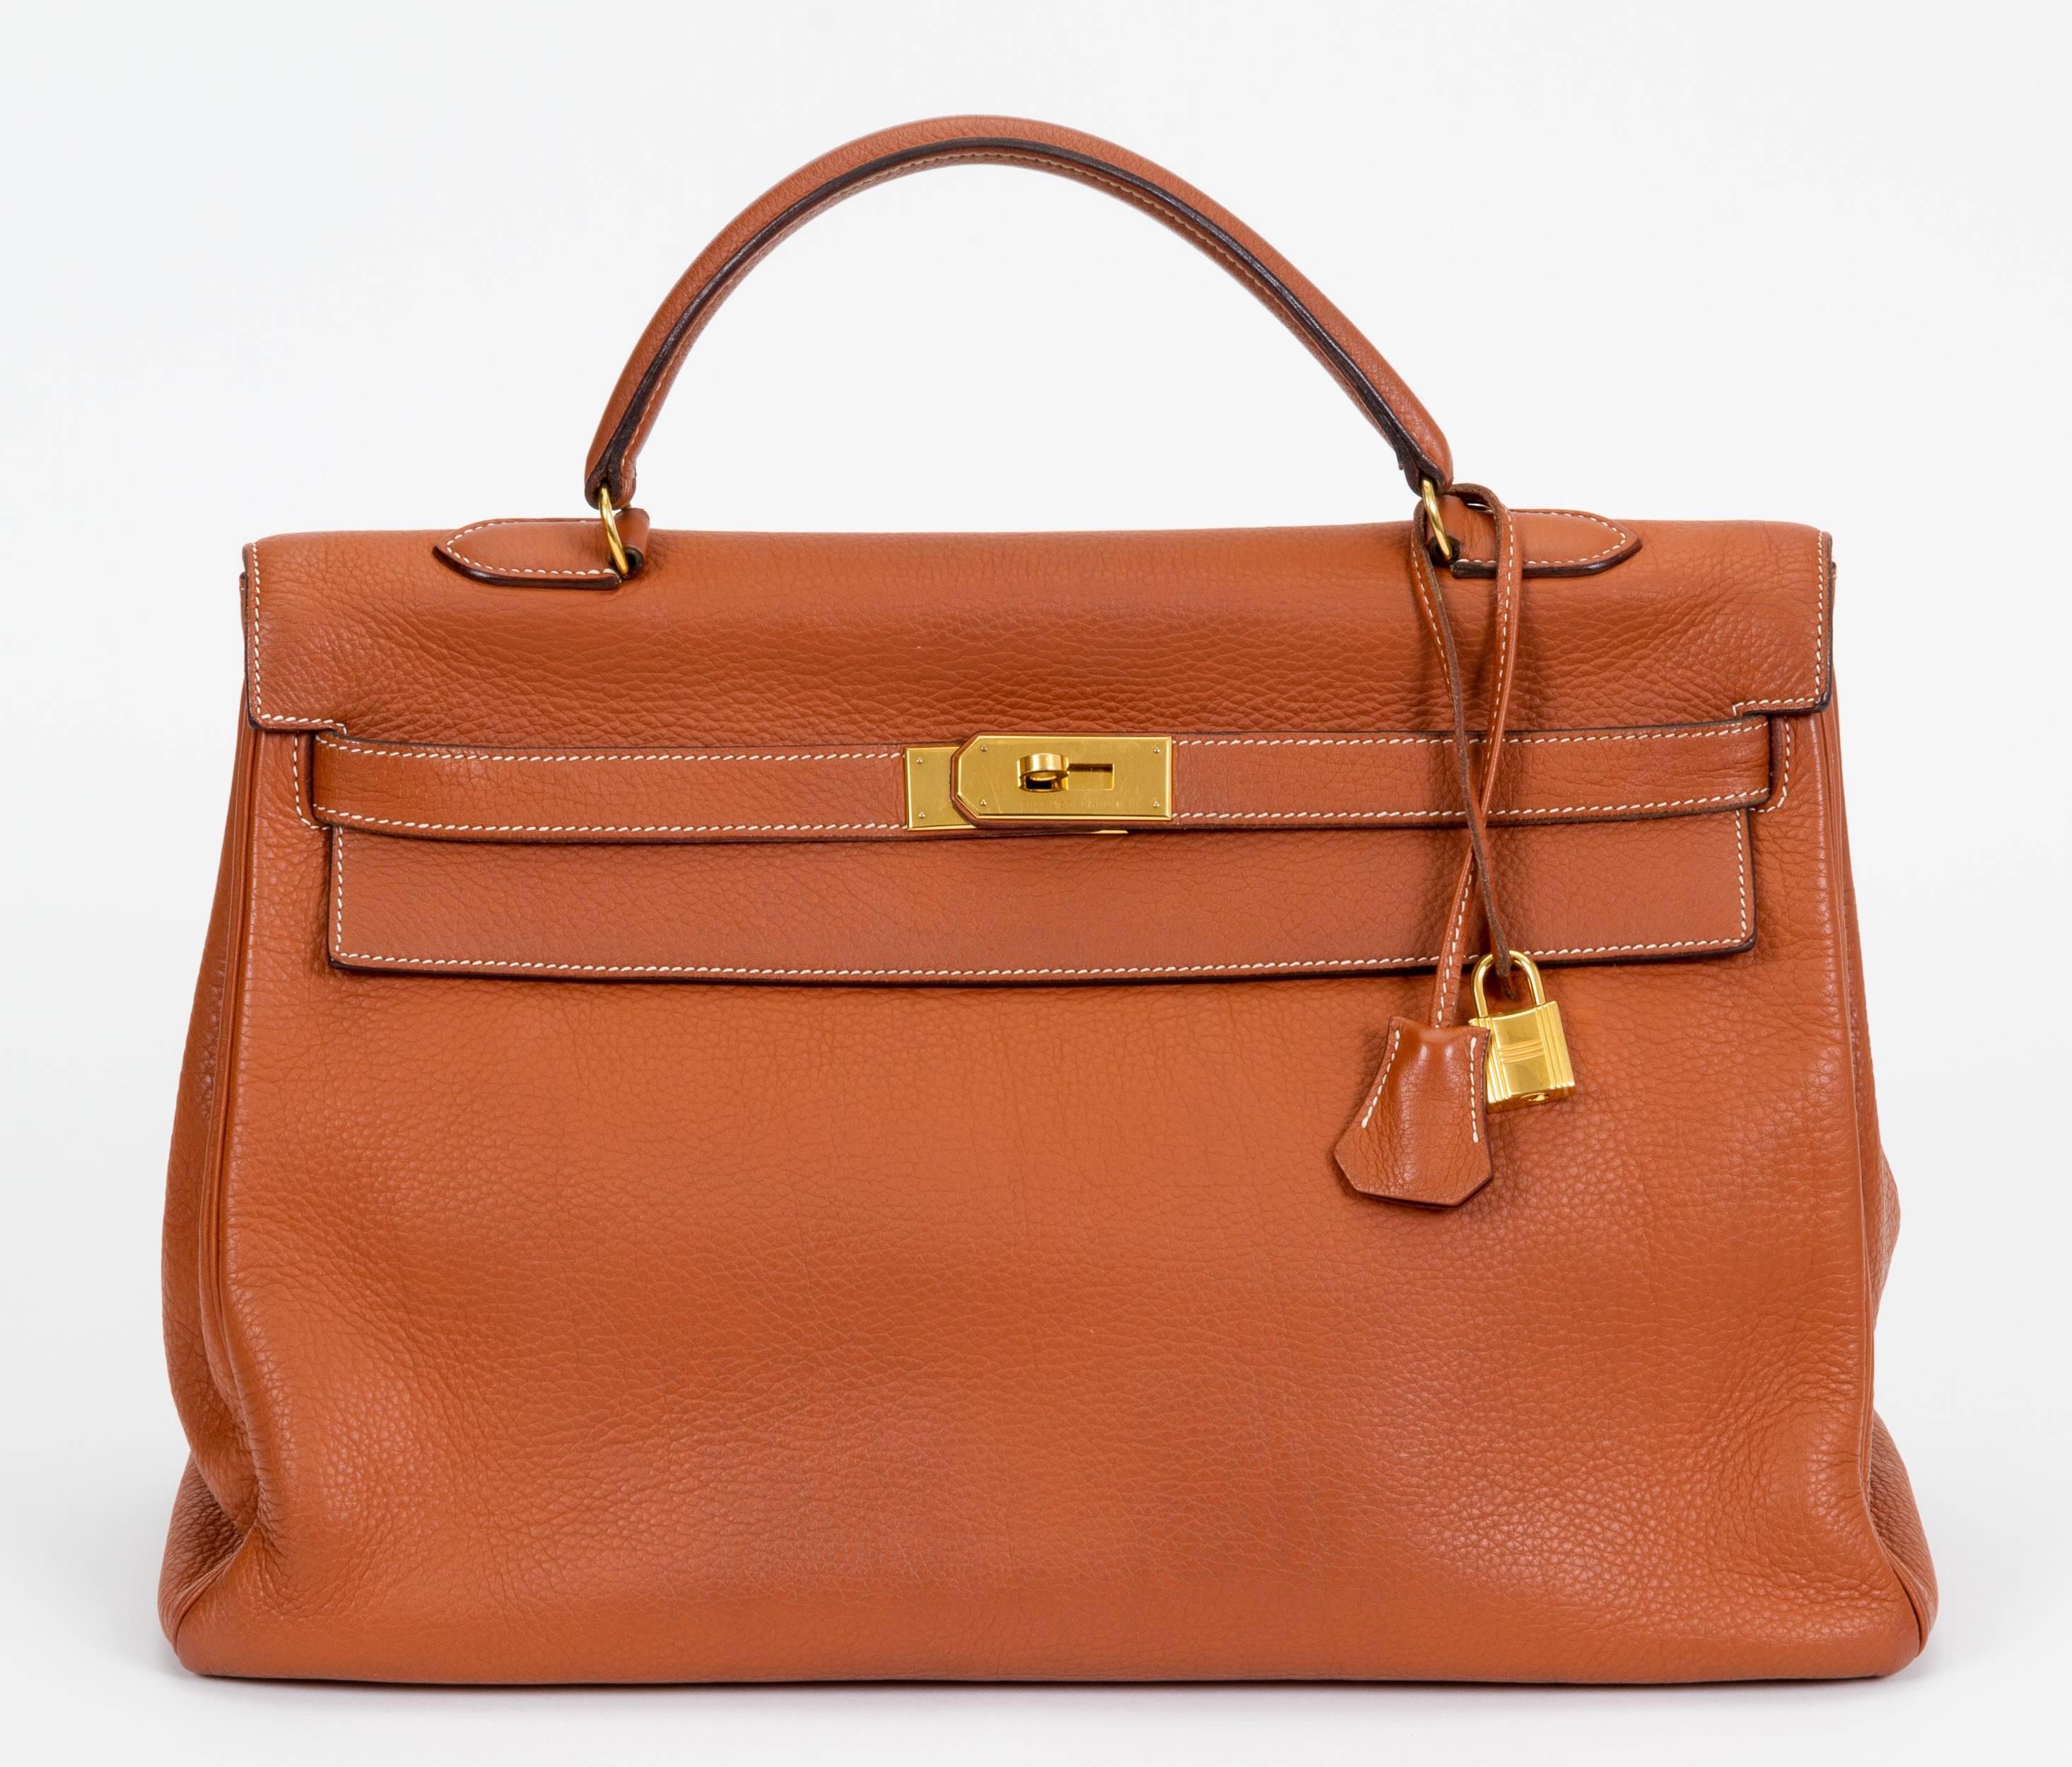 Hermès Kelly bag in etrusque clemence leather and gold tone hardware. 40cm. Handle drop, 4.